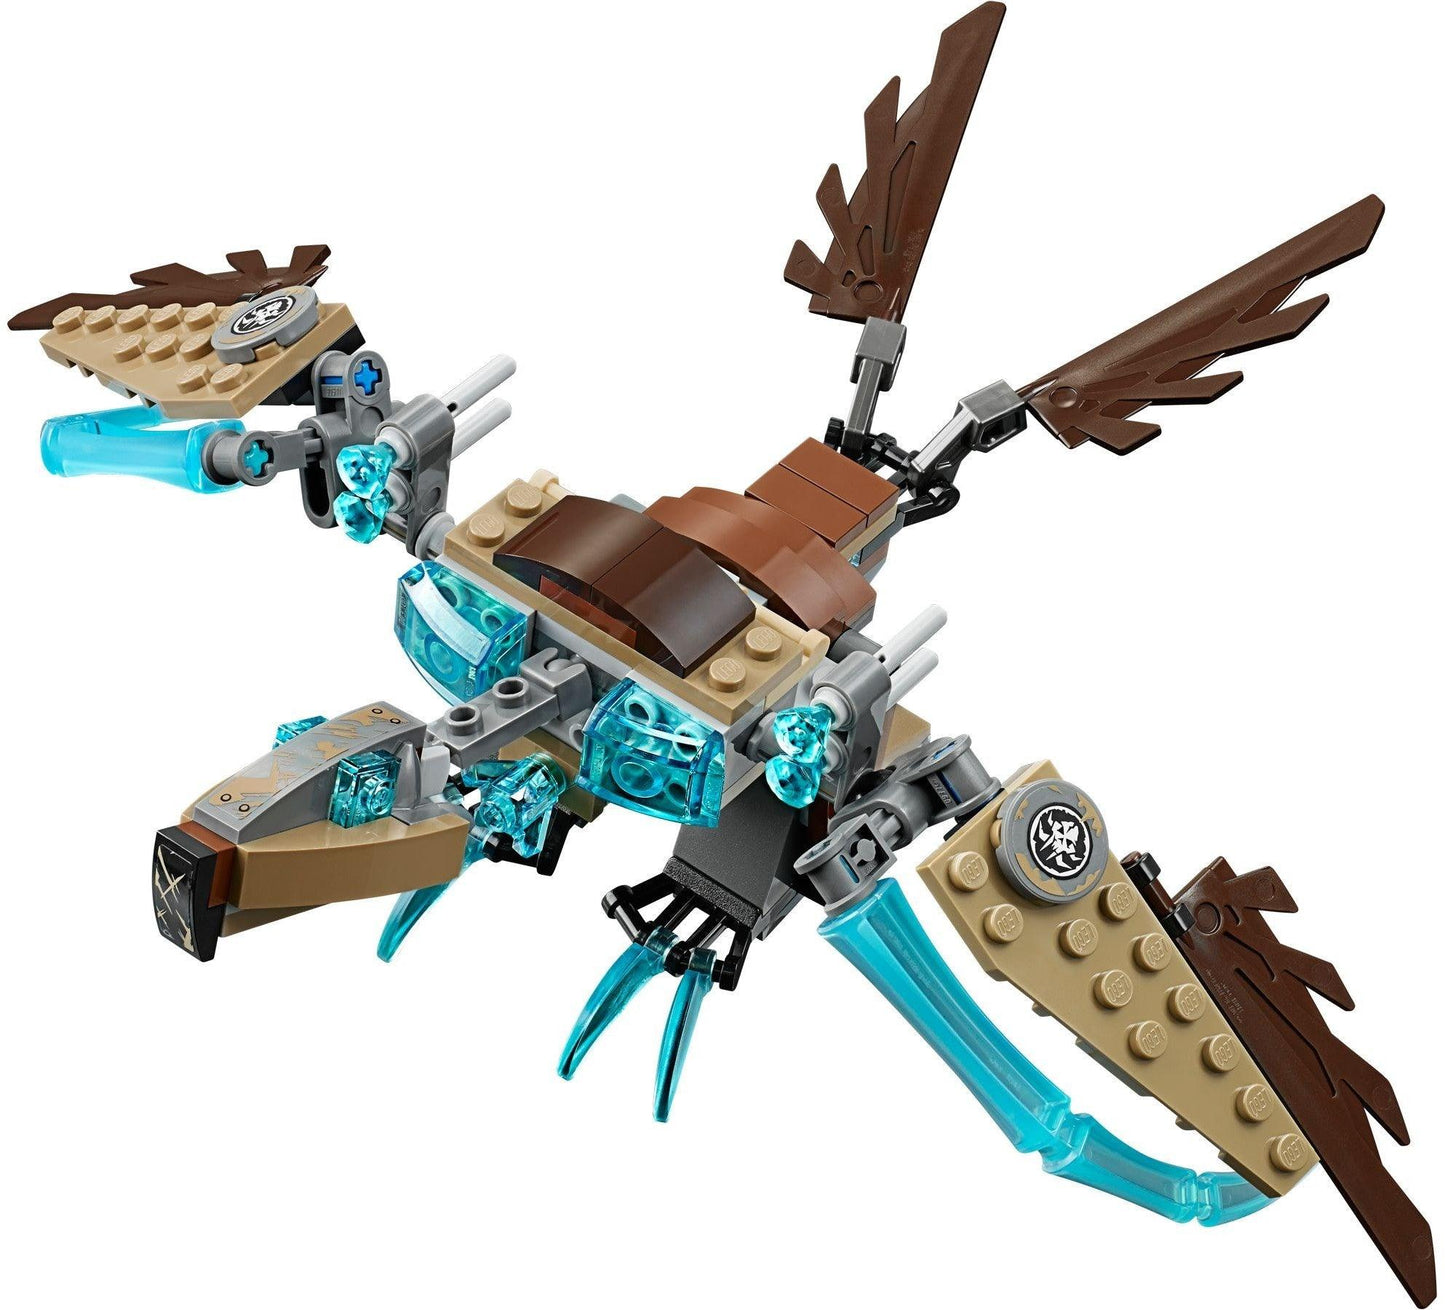 LEGO Vardy's Ice Vulture Glider 70141 Legends of Chima - Fire vs. Ice (USED) | 2TTOYS ✓ Official shop<br>